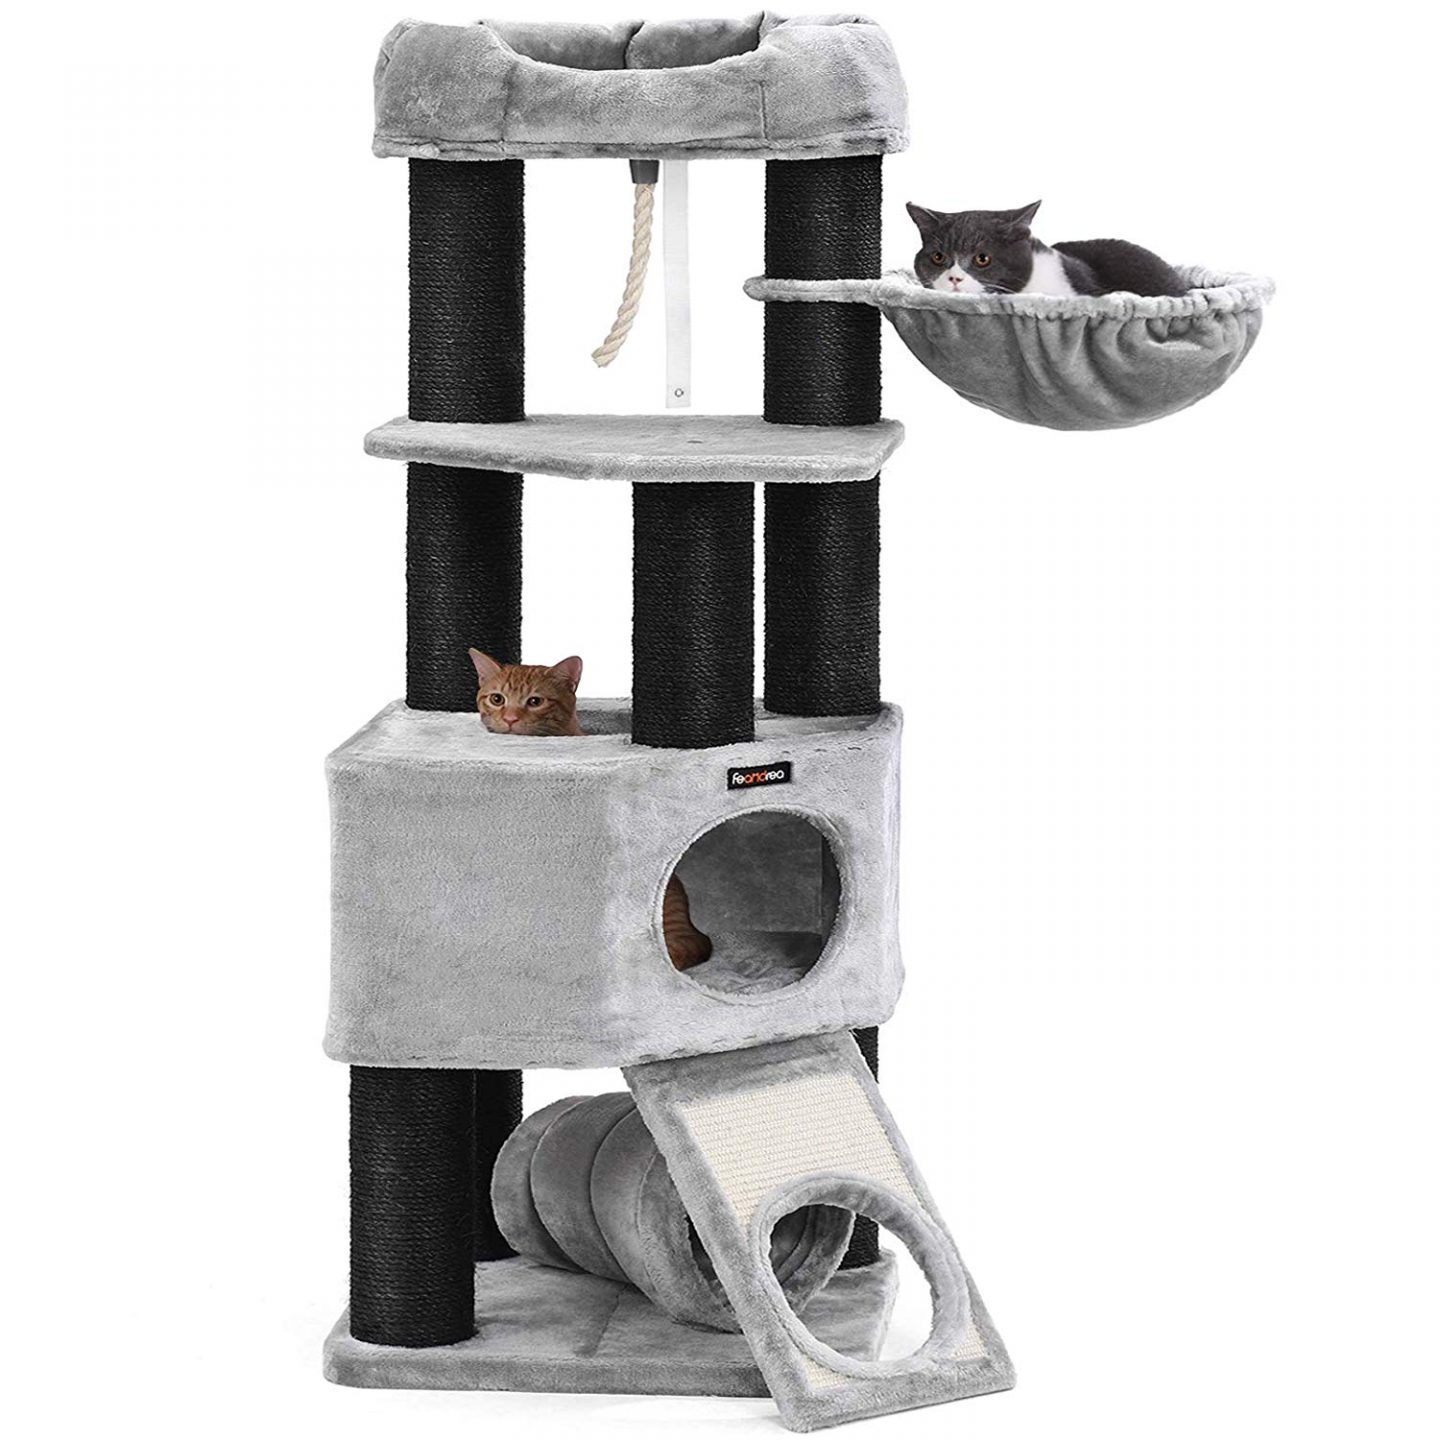 Super cute black and grey cat tree with tunnel. You won't believe how affordable it is!